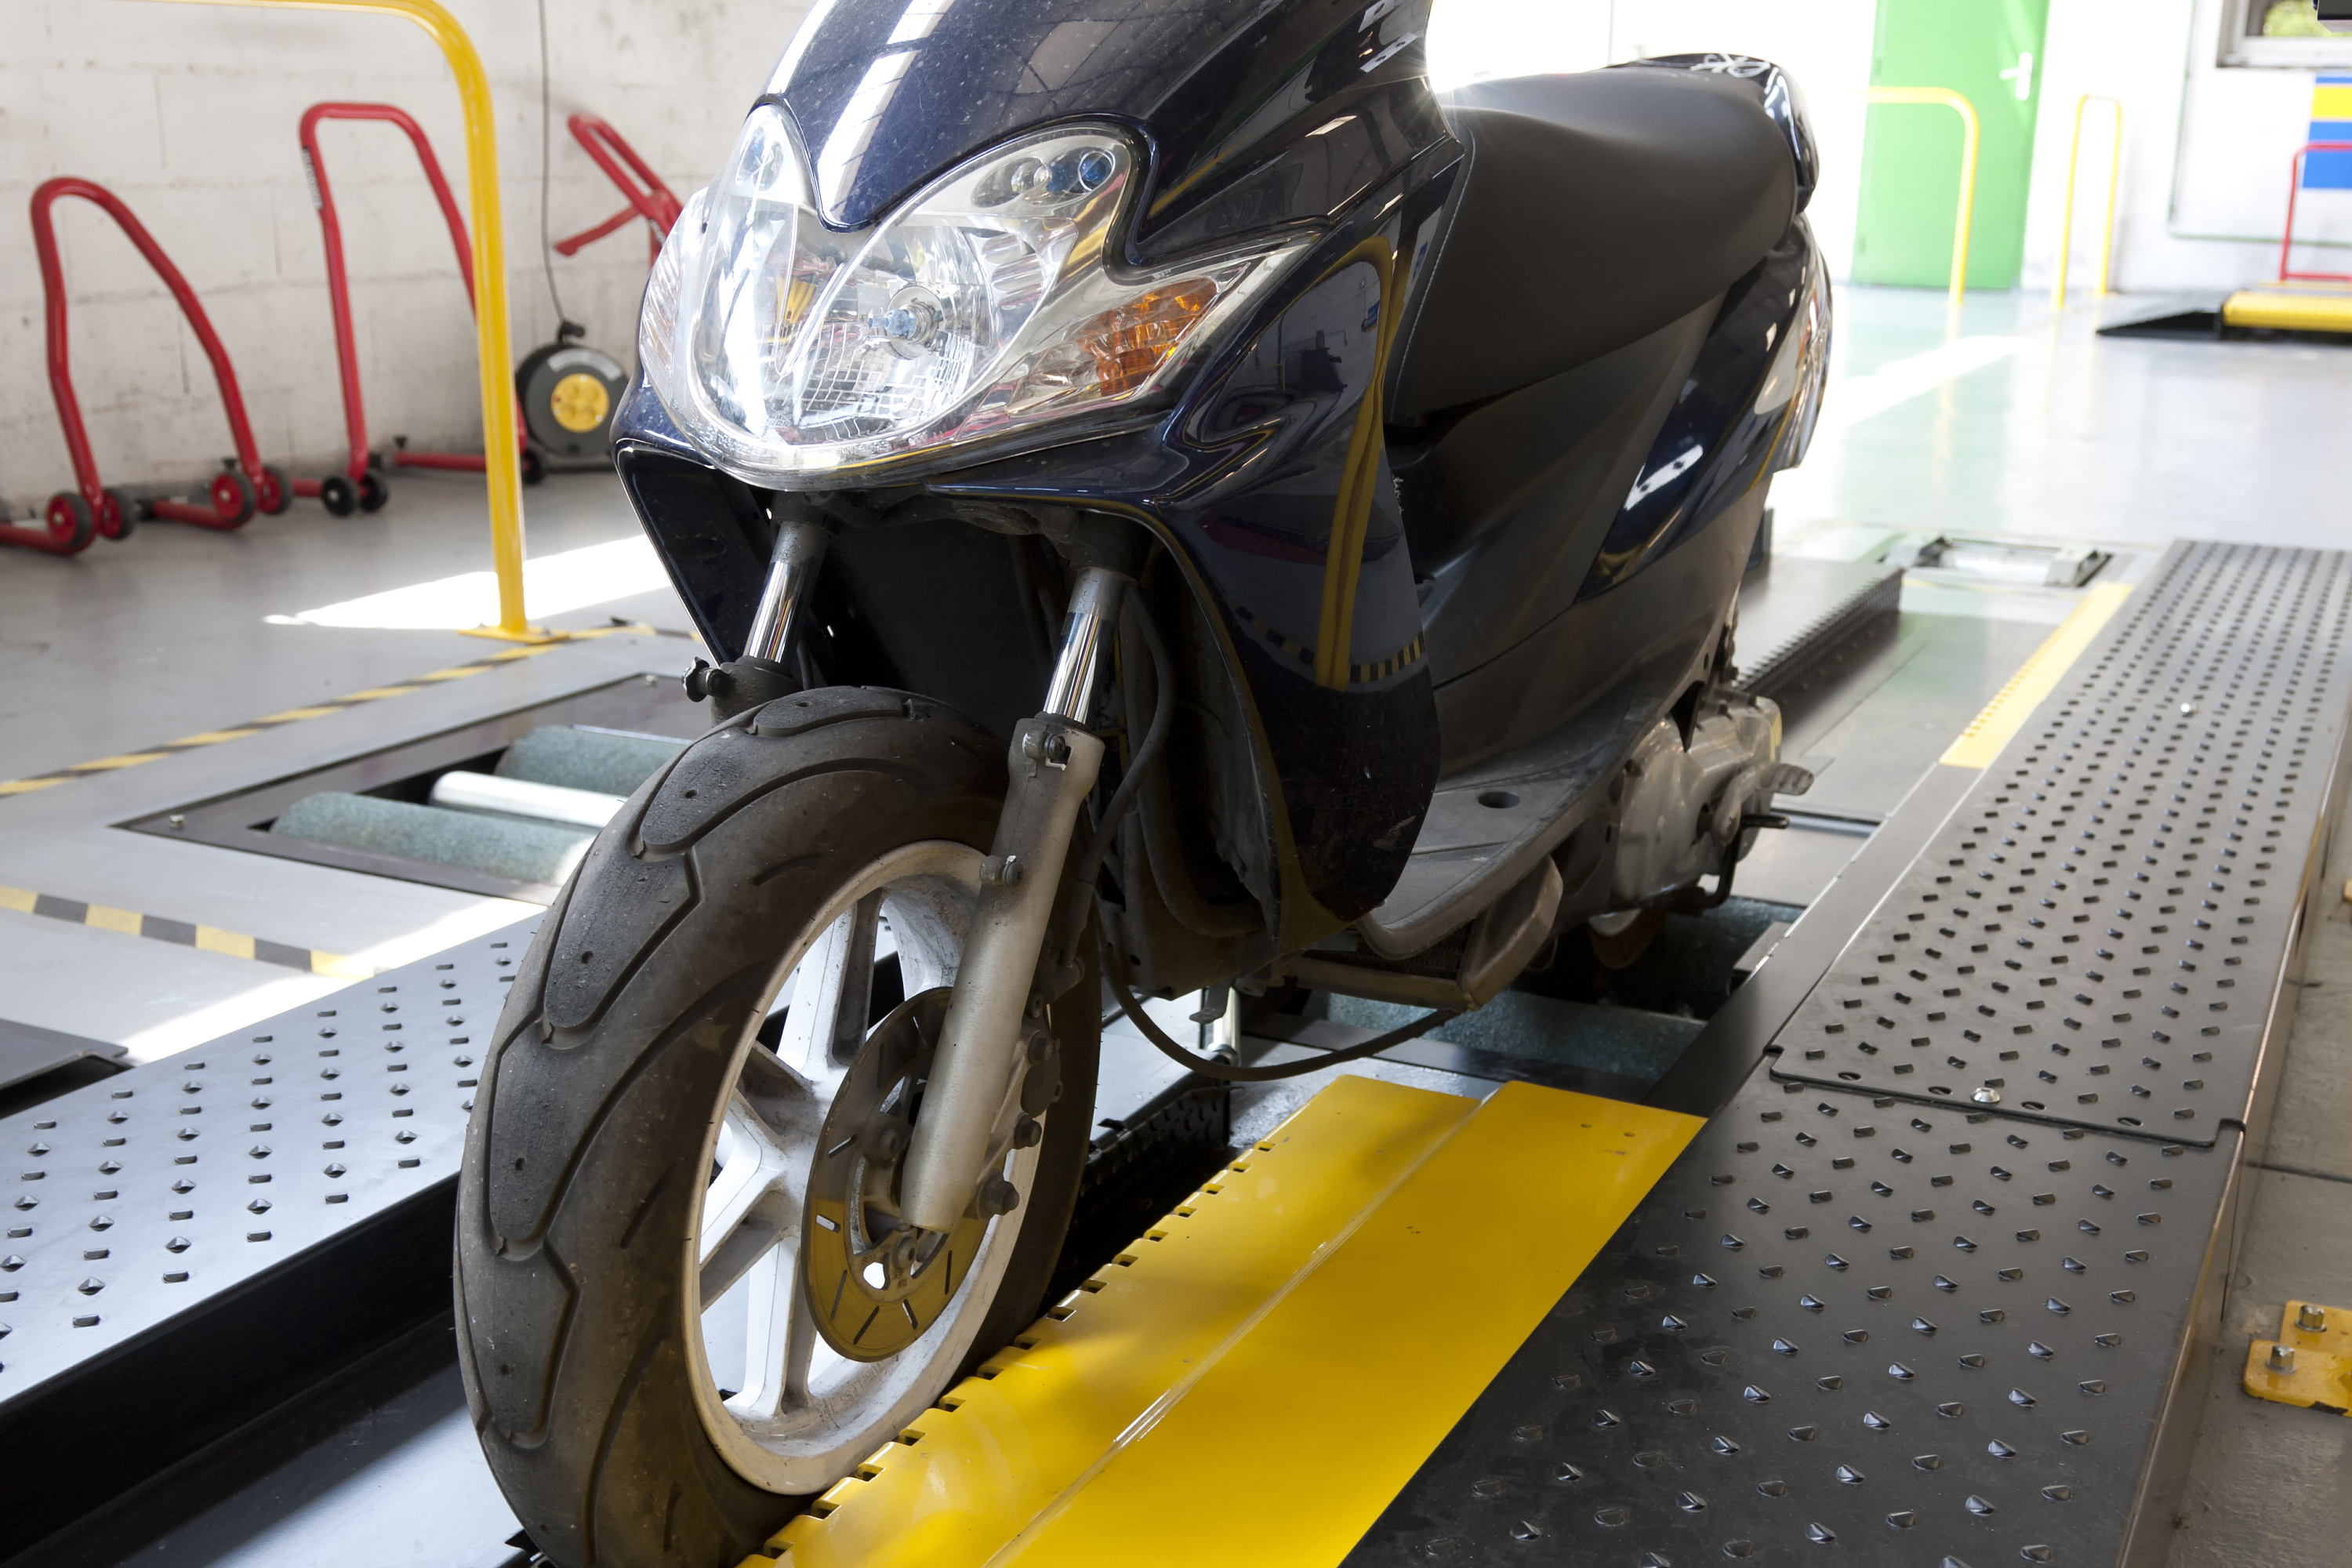 “It was a real challenge”: technical inspection professionals ready to certify motorcycles and scooters